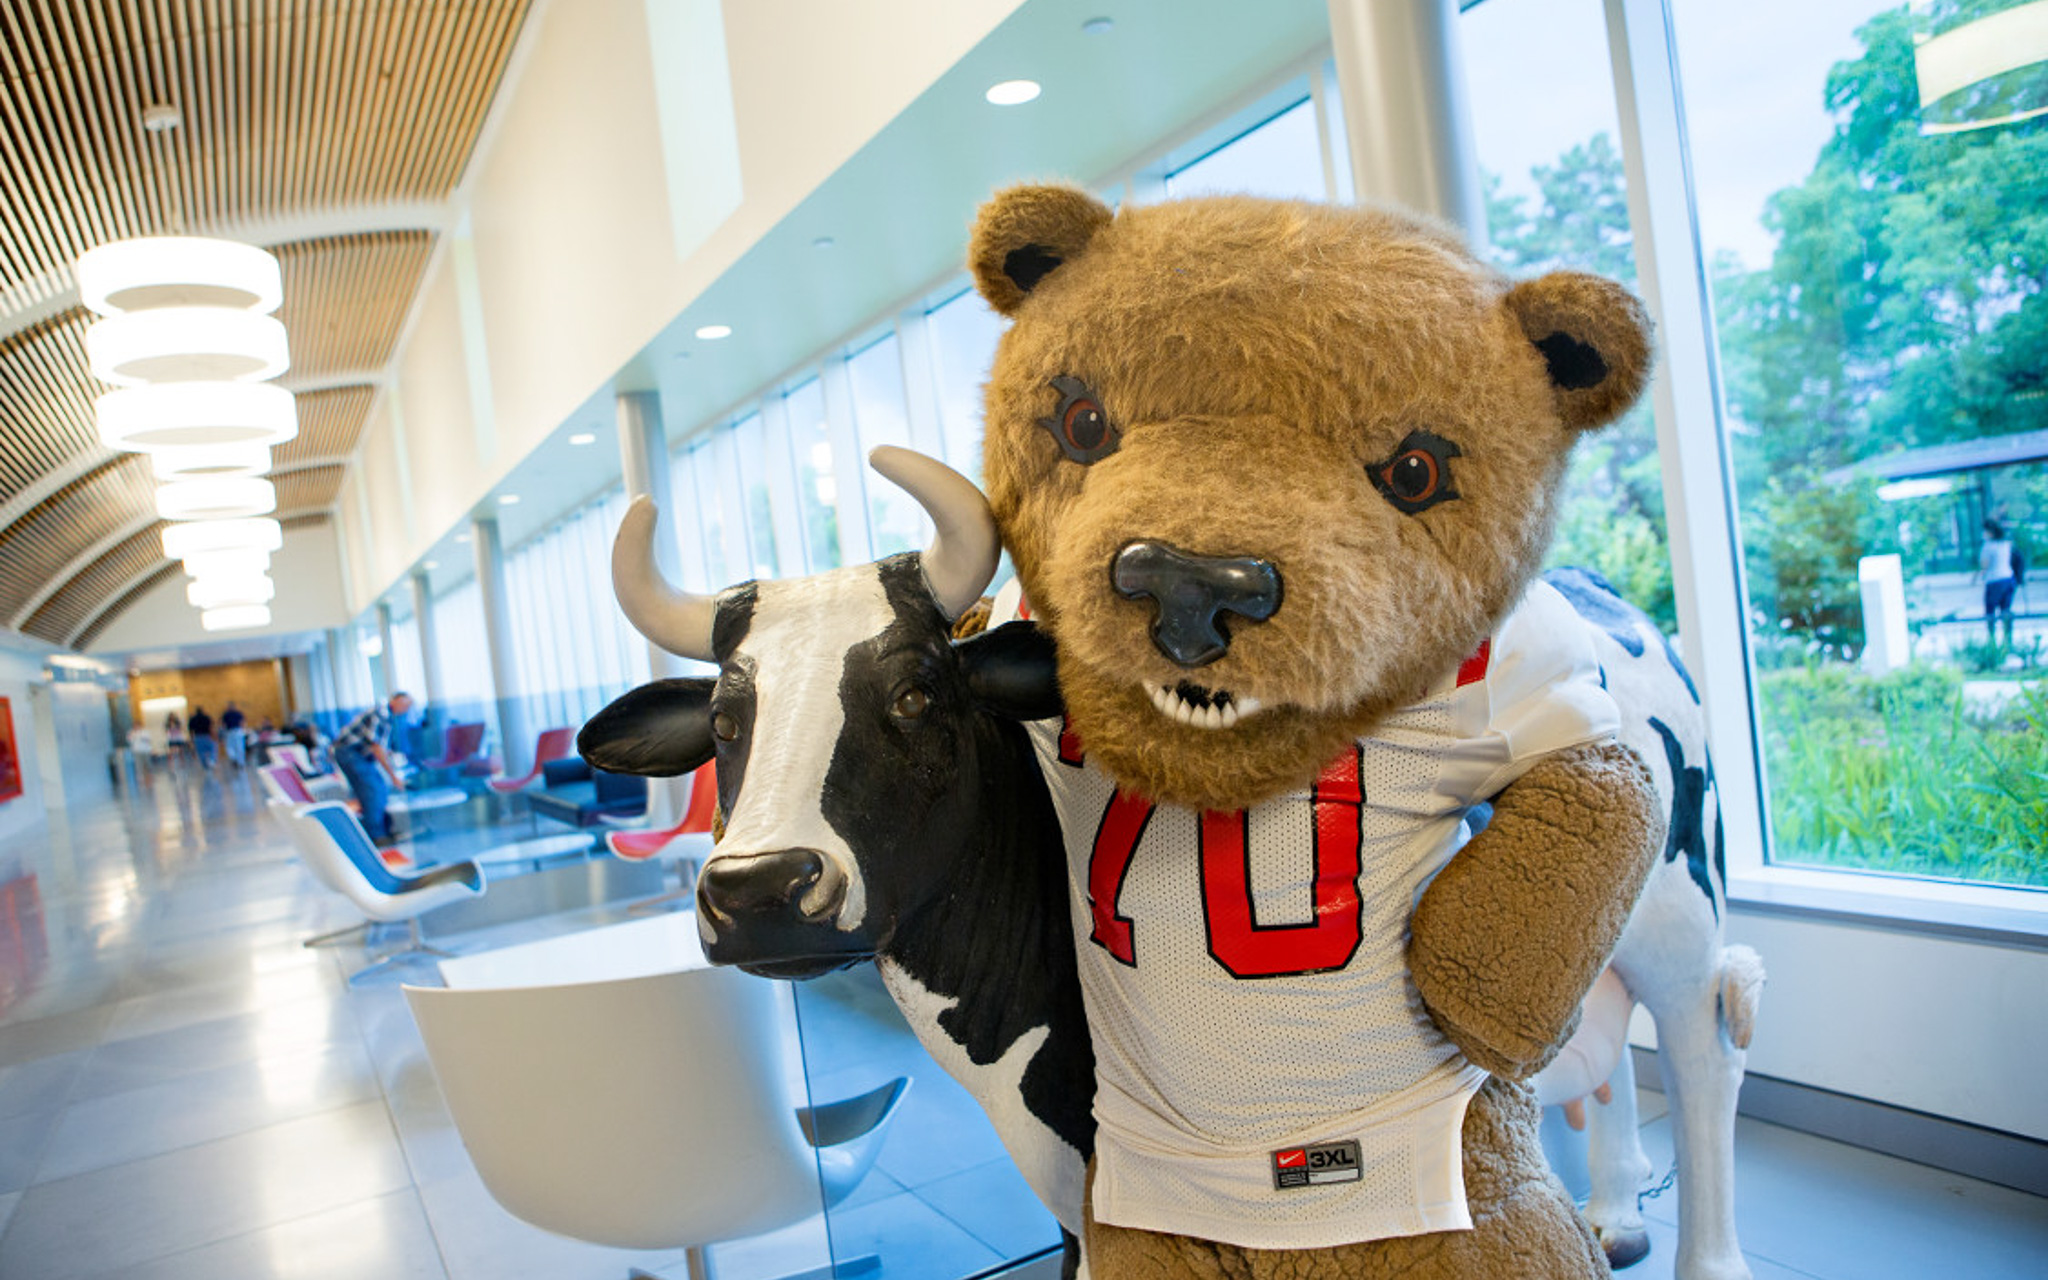 Cornell's Mascot Touchdown posing with the plastic cows located in Stocking Hall